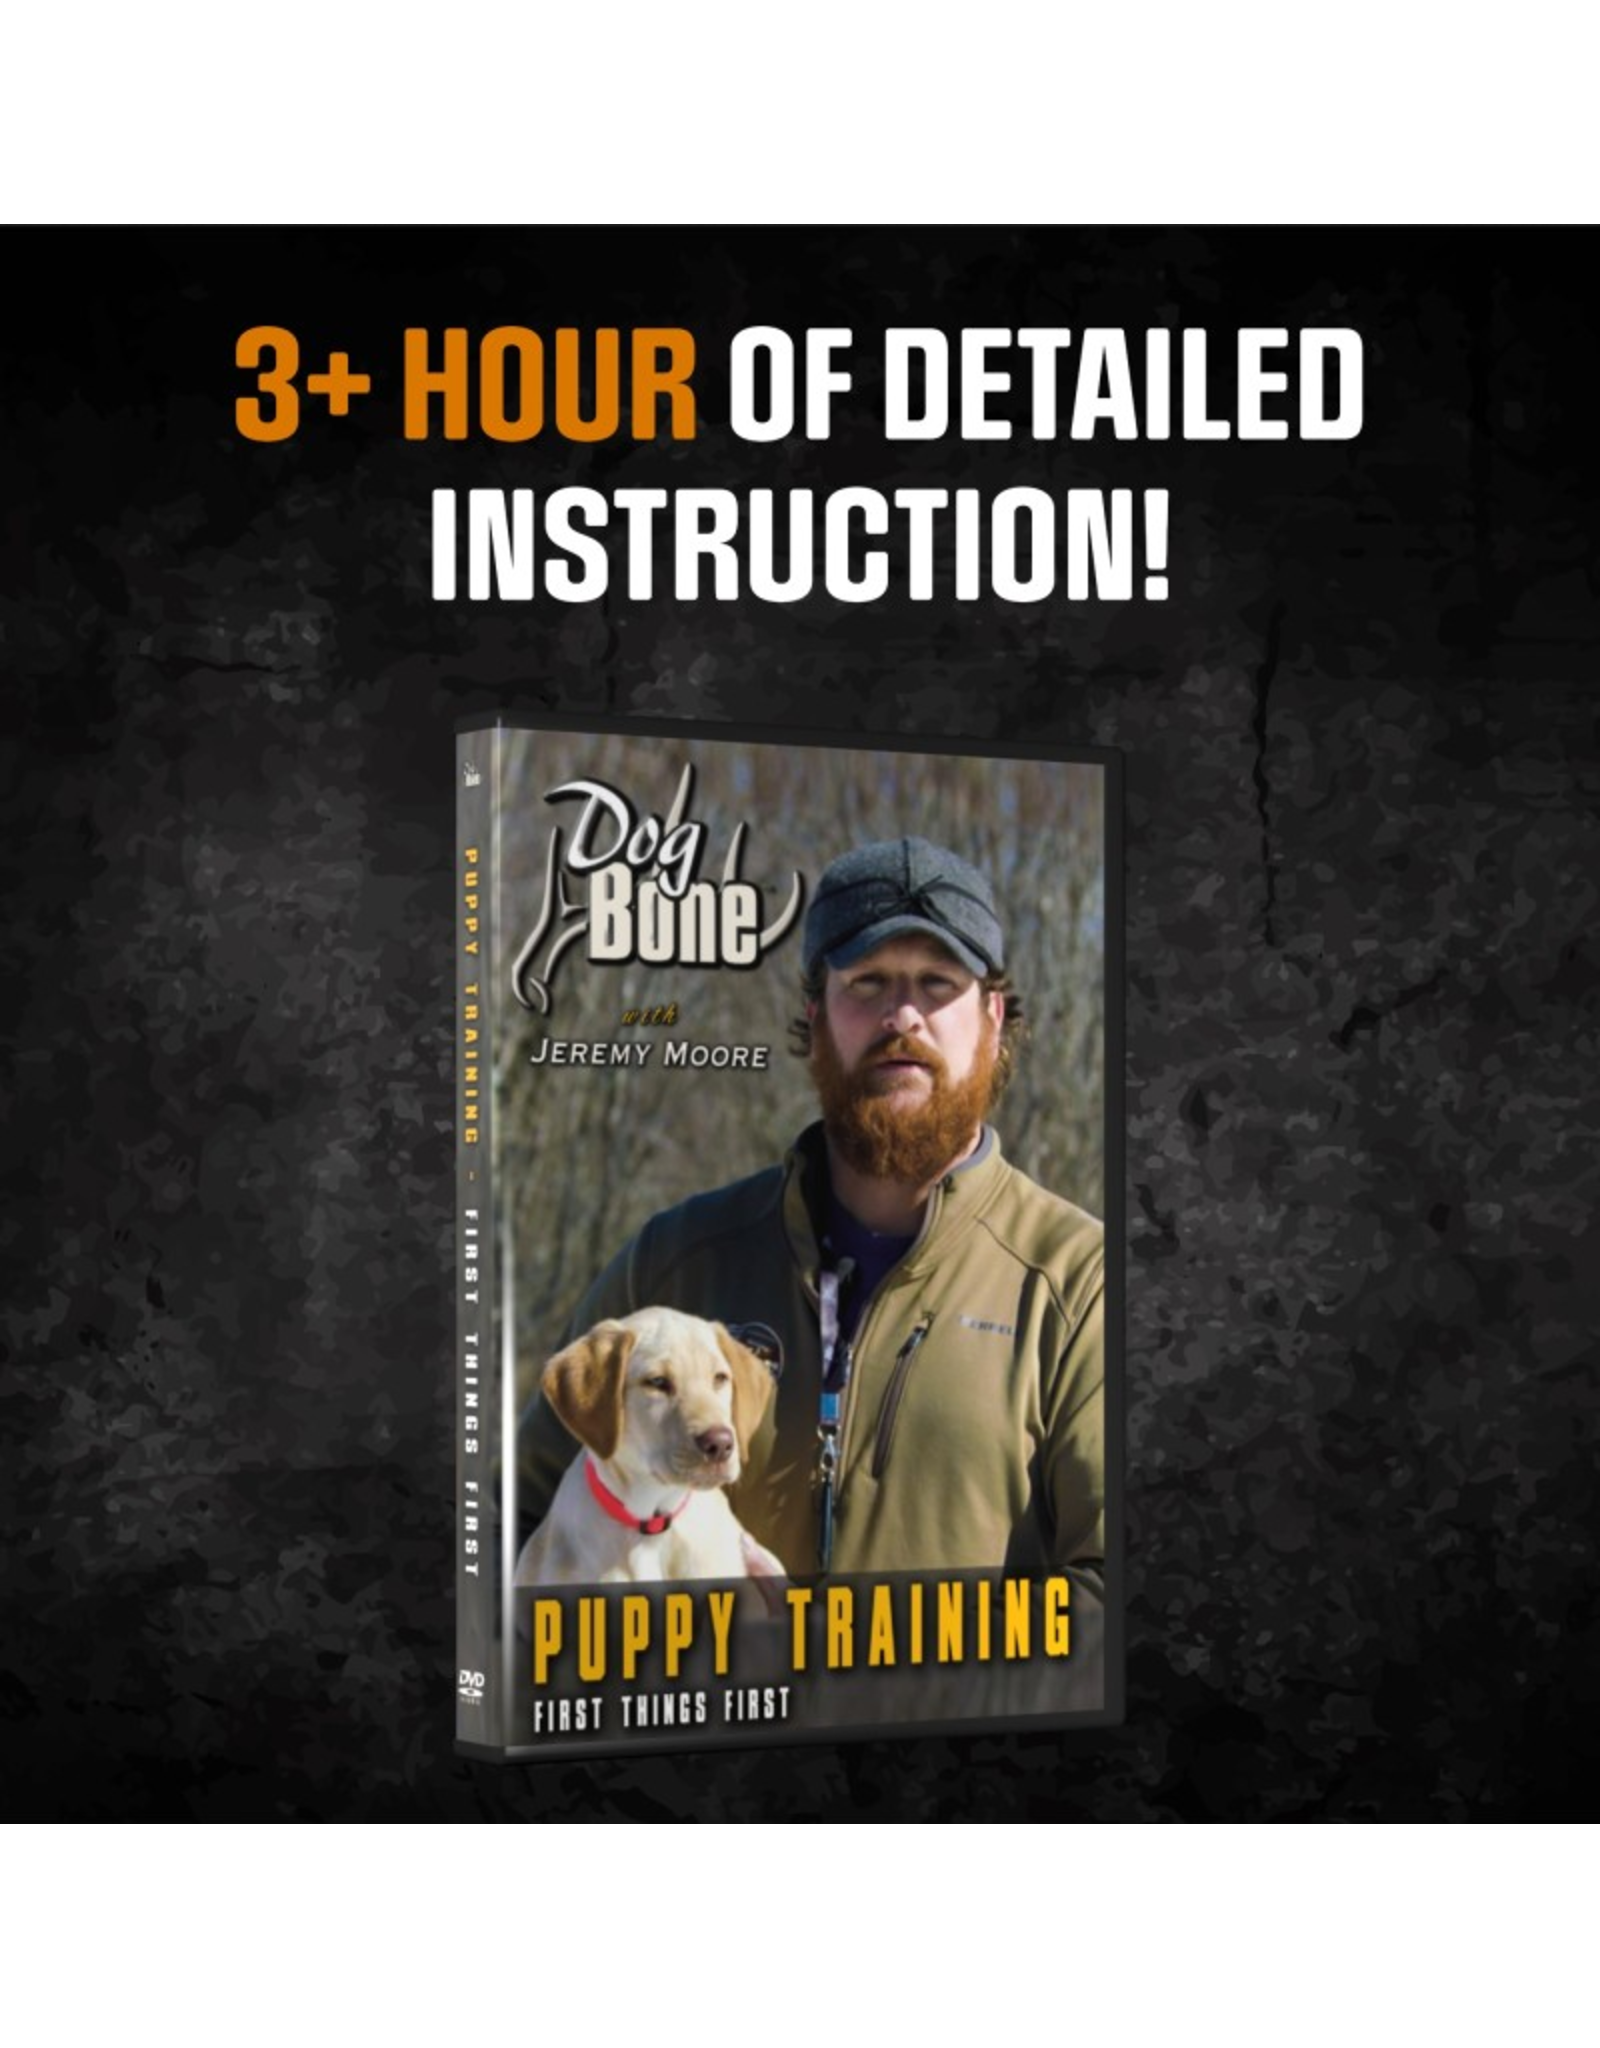 Dogbone with Jeremy Moore (puppy training) 3 hours of detailed instruction